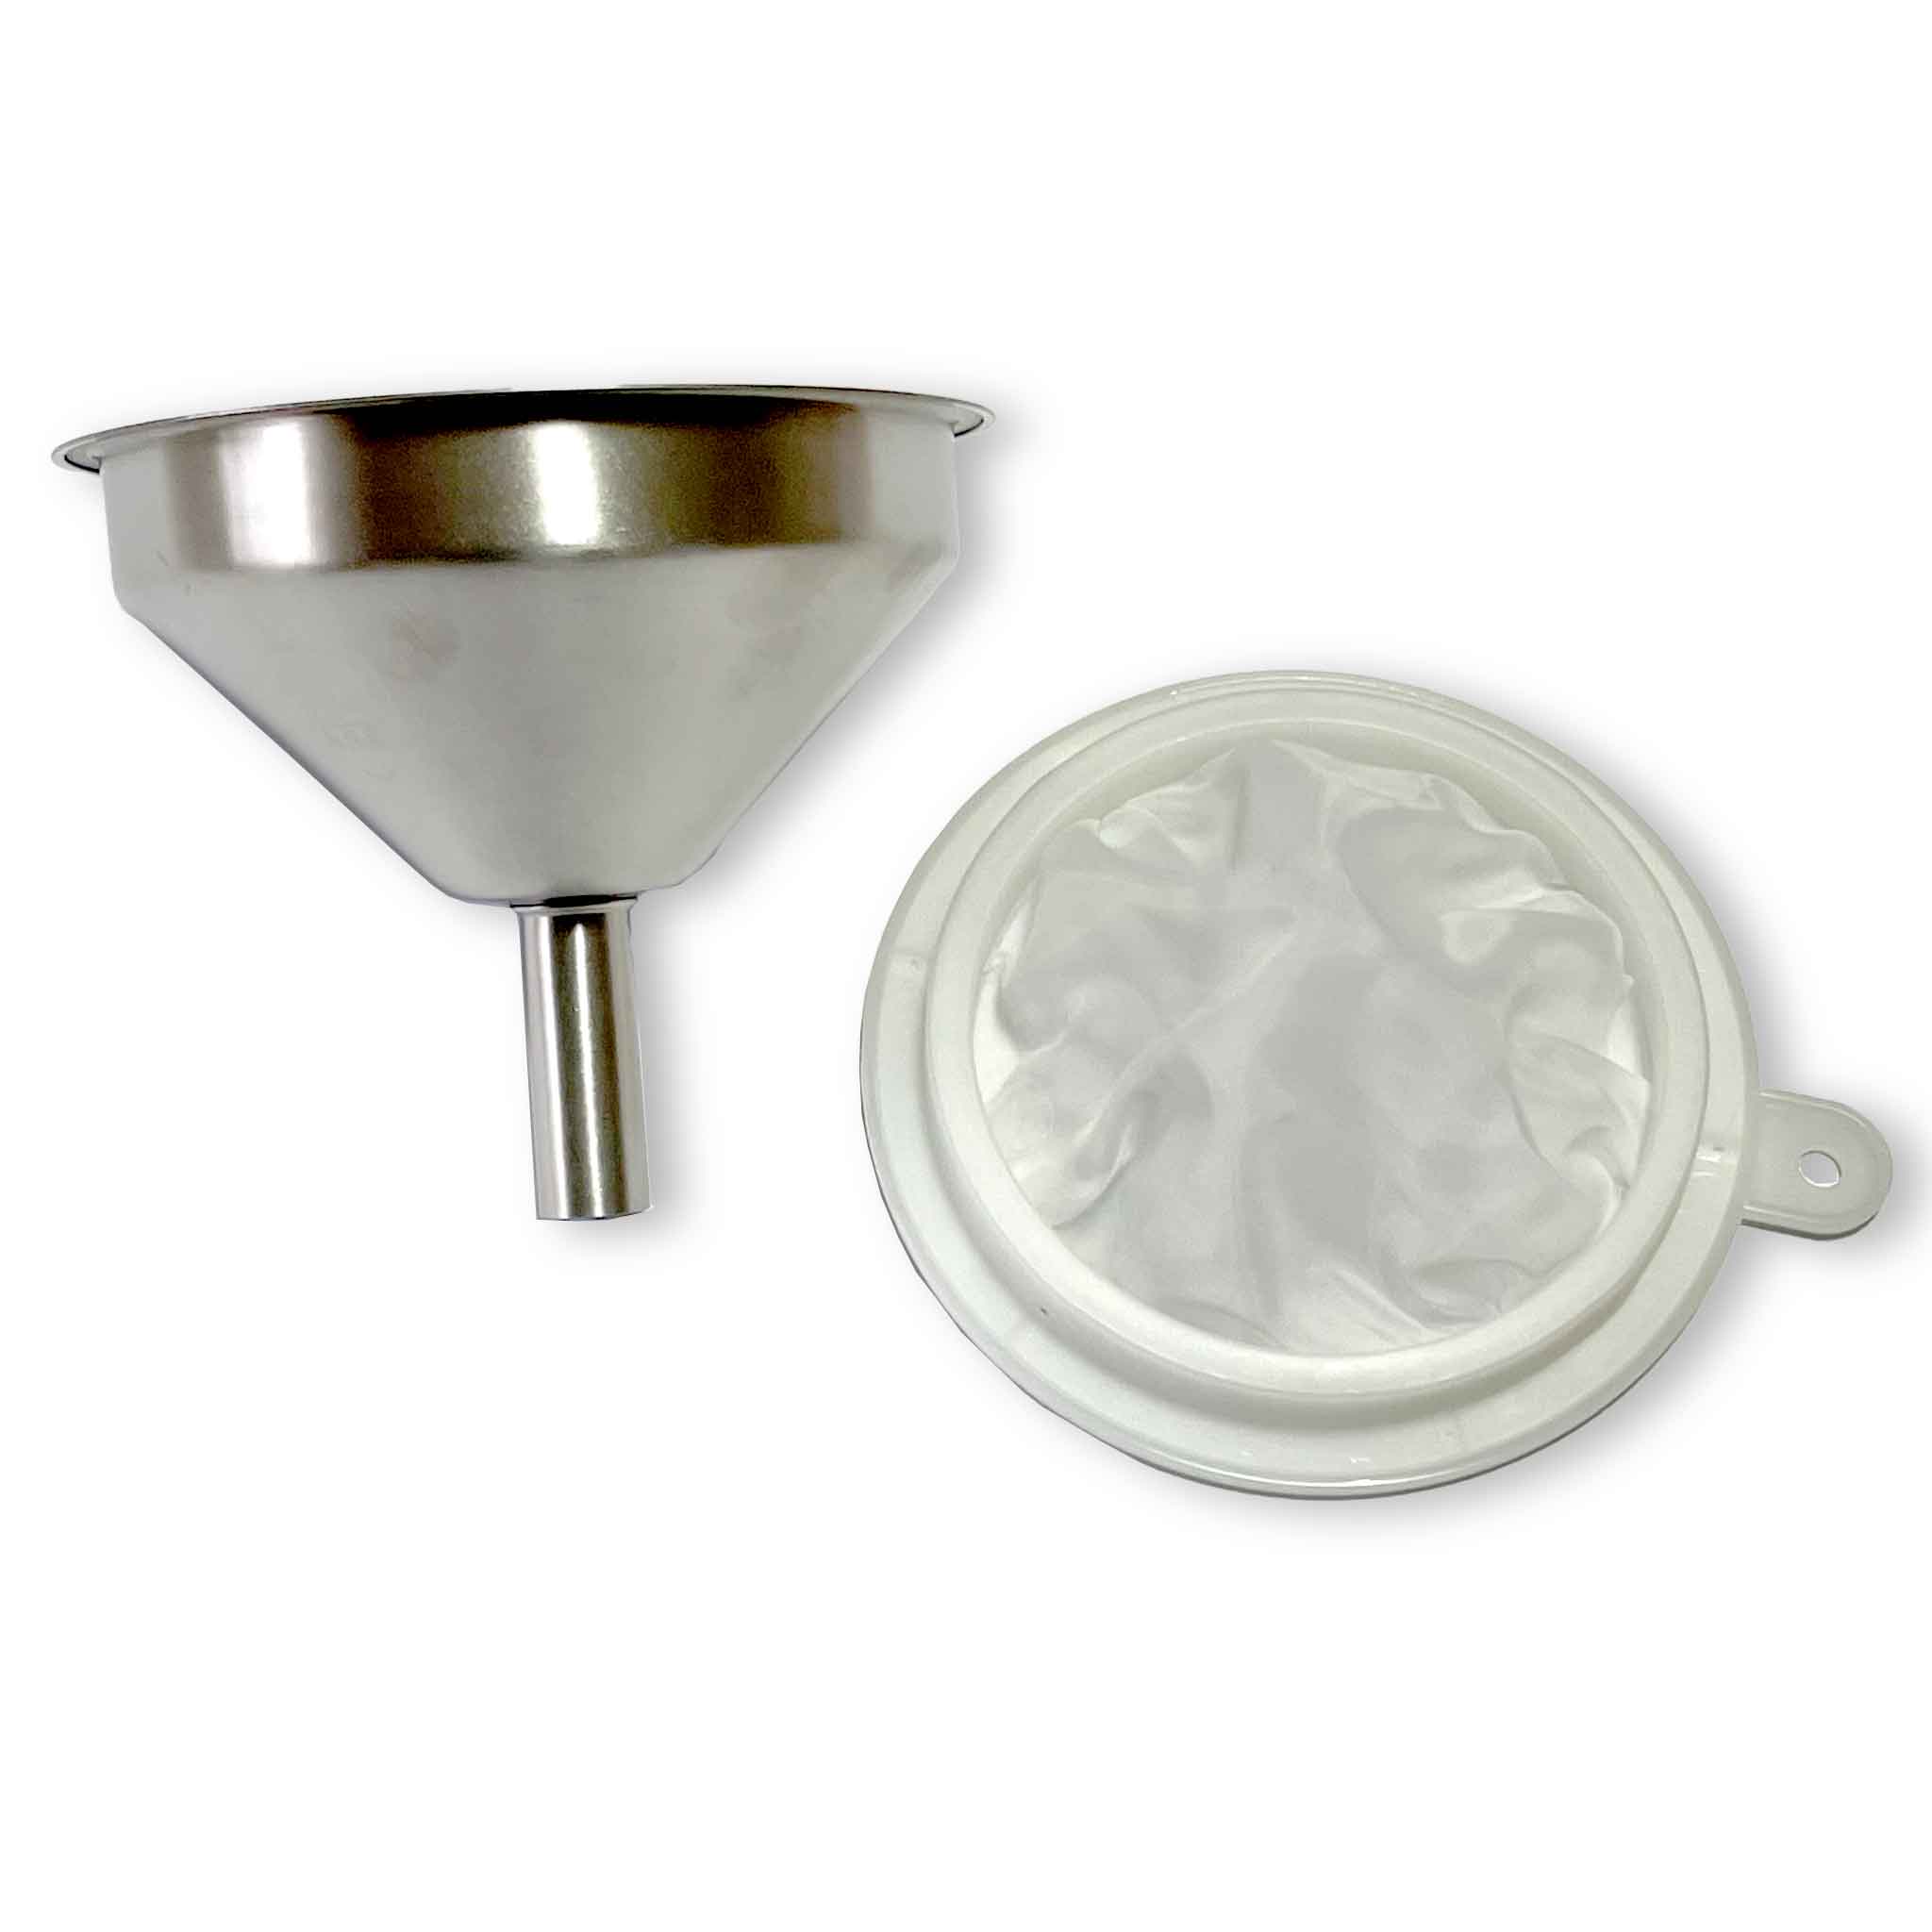 Honey Funnel Stainless-steel with Nylon Filter - Processing collection by Buzzbee Beekeeping Supplies